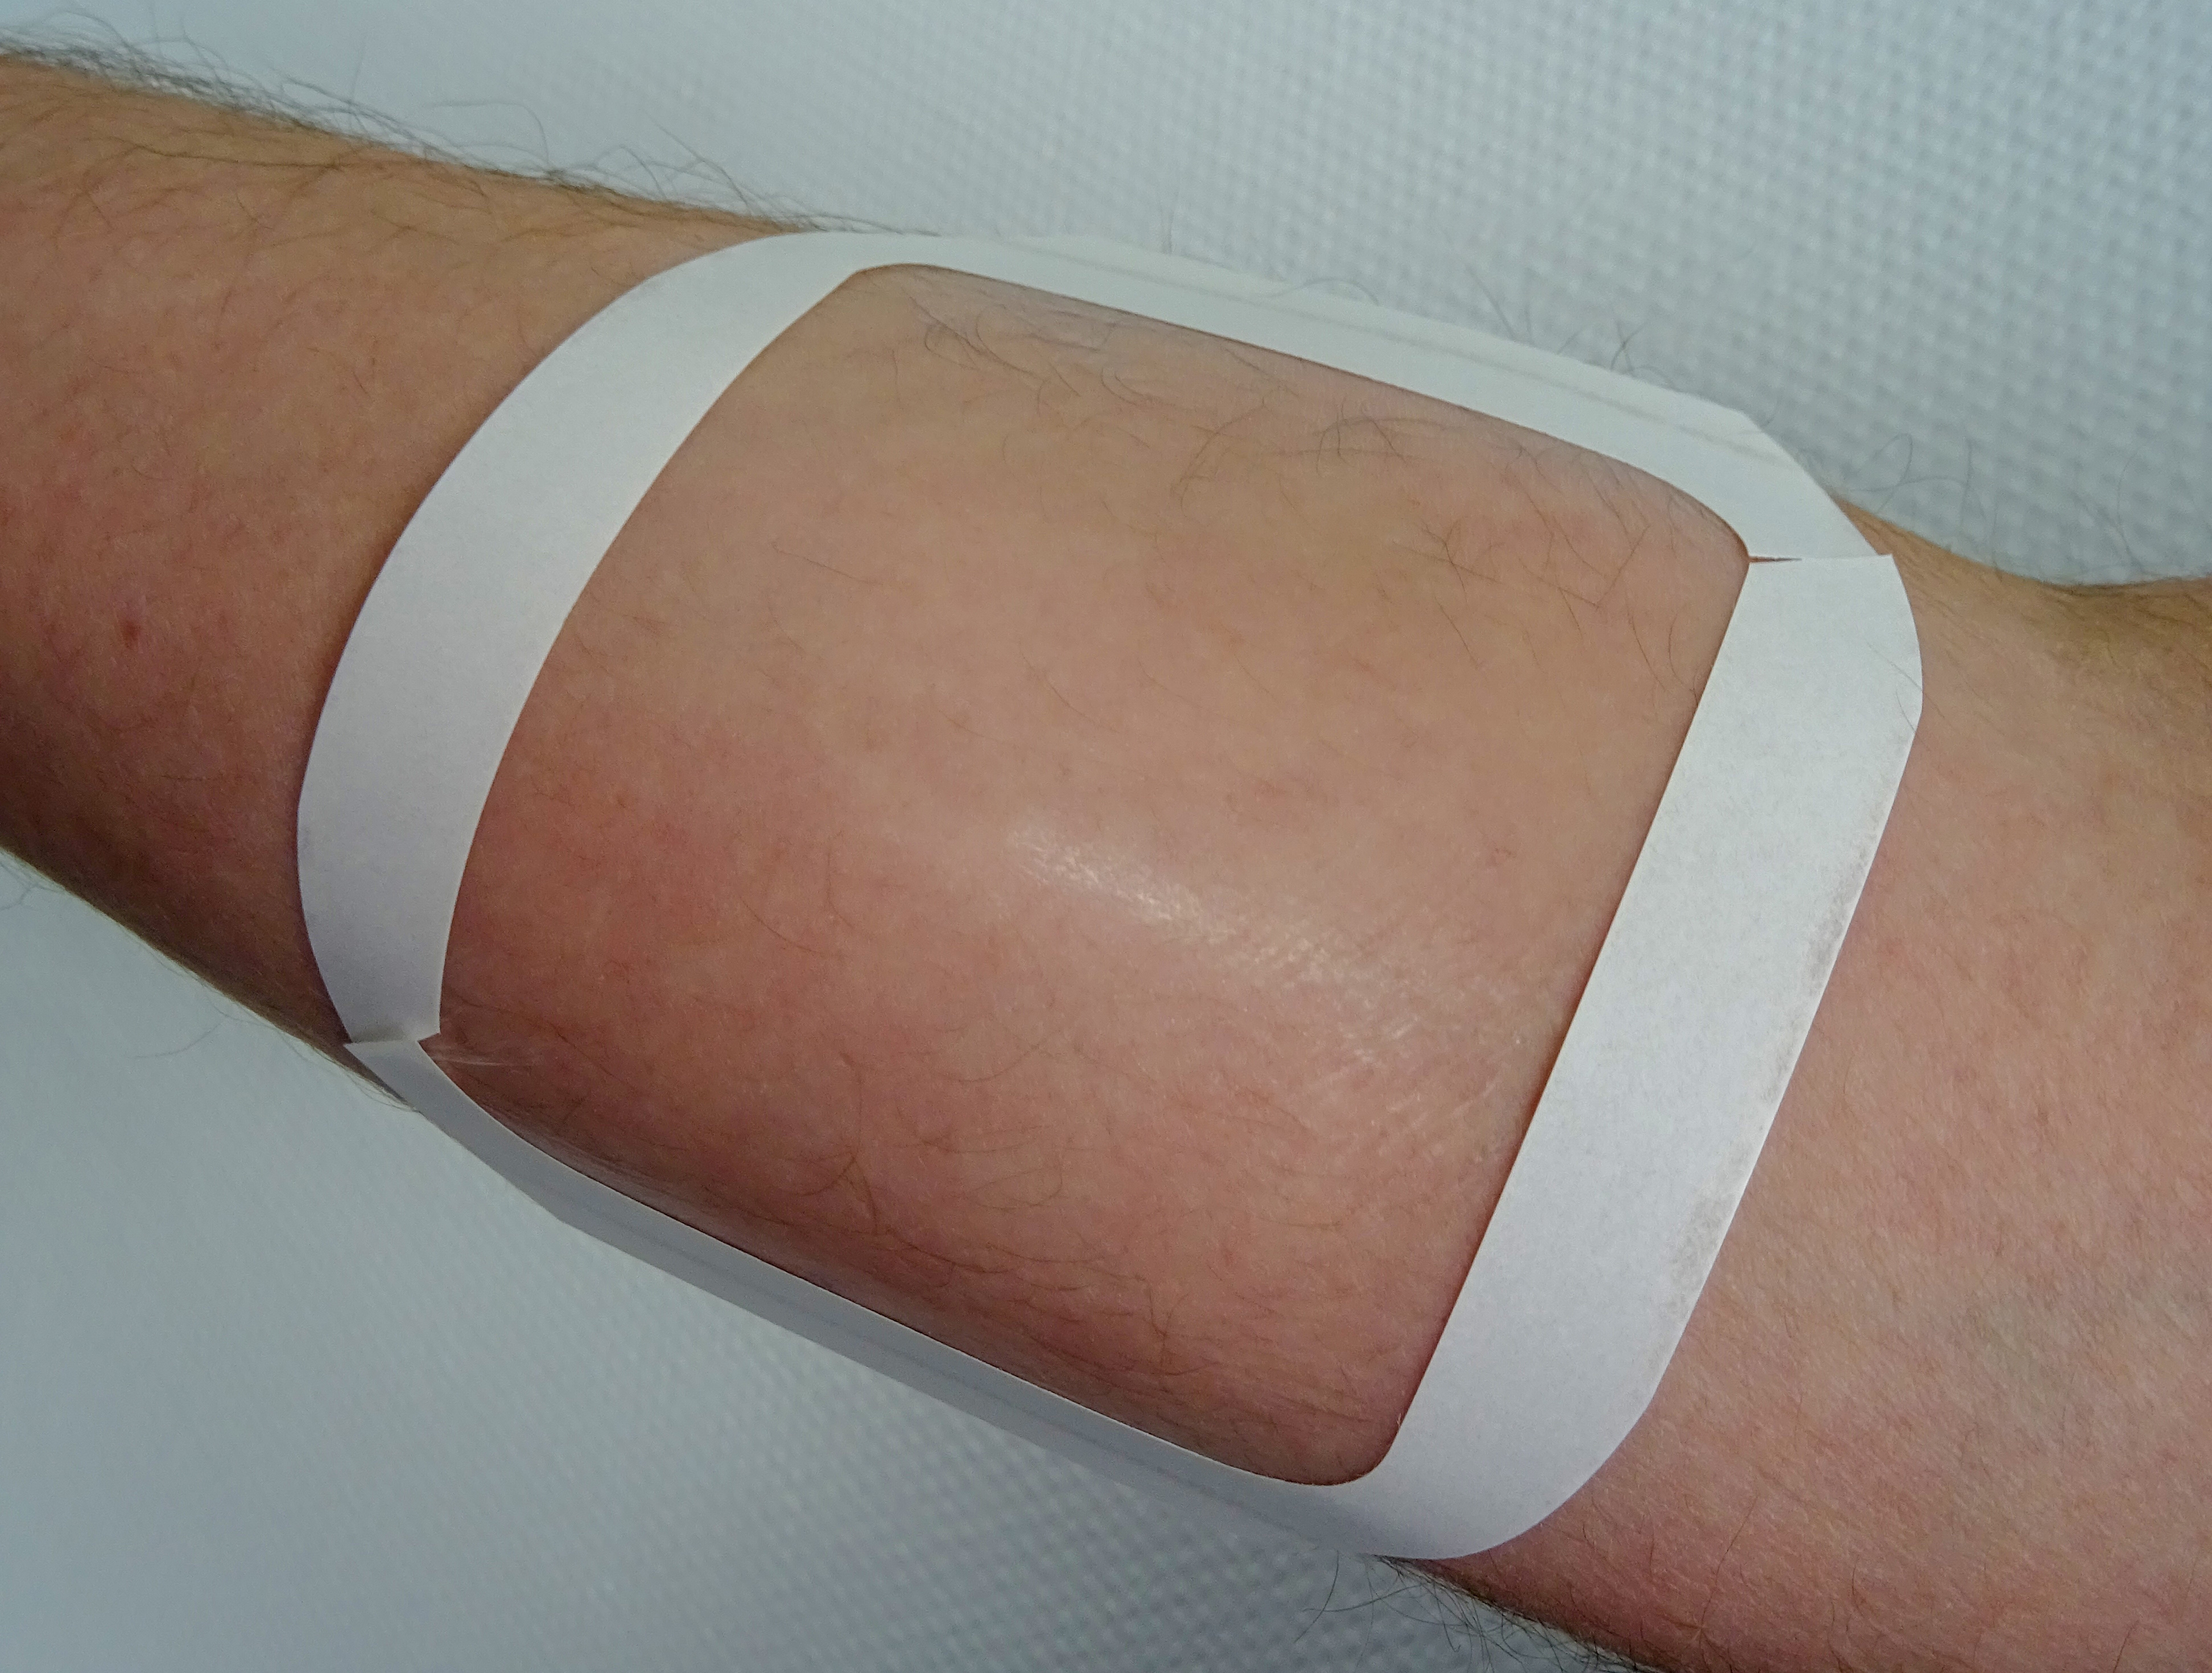 <ul><li>Single sided polyurethane film with silicone gel</li><li>Designed to protect insertion points as well as perilesional and sensitive skin</li><li>Can be removed without pain or trauma thanks to the silicone gel </li></ul>